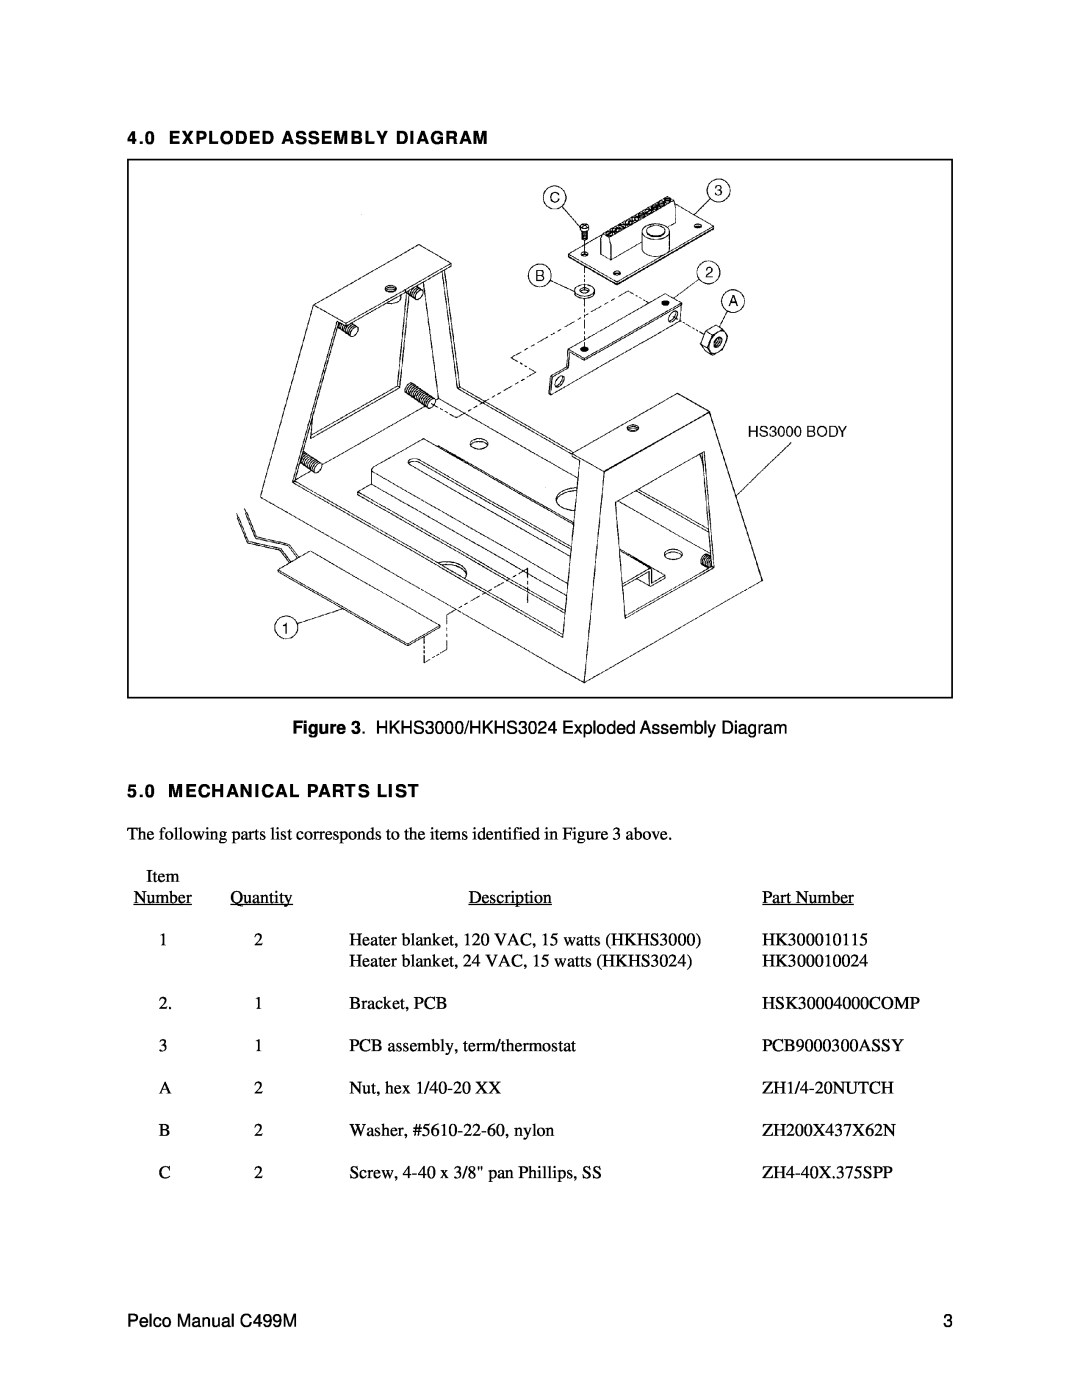 Pelco HKHS3024 operation manual Exploded Assembly Diagram, Mechanical Parts List 